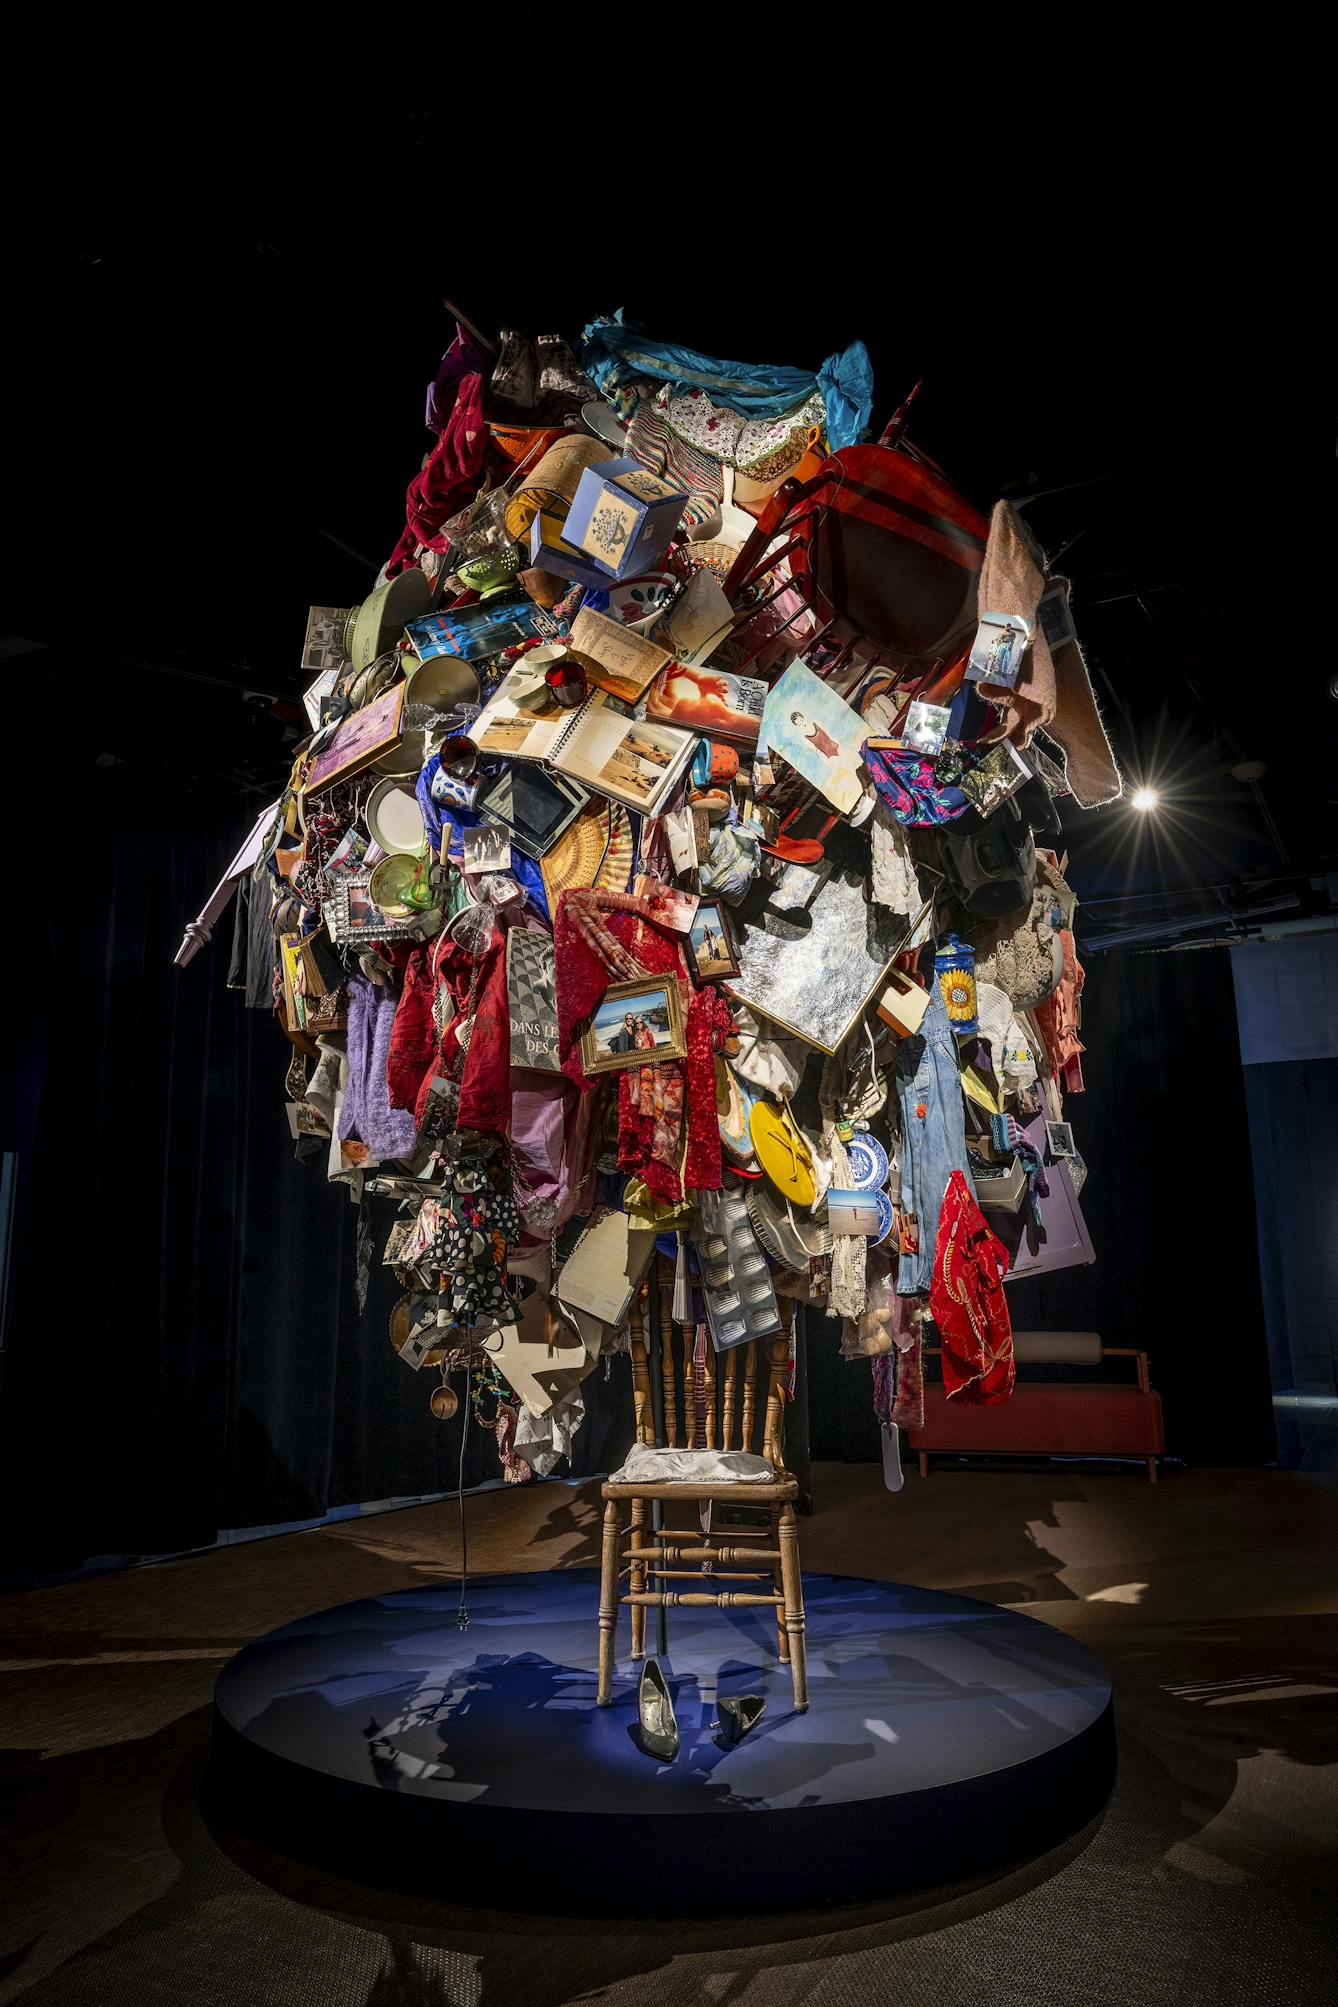 An artwork on display on a low circular plinth. The work consists of a dining chair with a mass of clothes, books, pictures and other domestic objects piled pricariously on top of the chair.